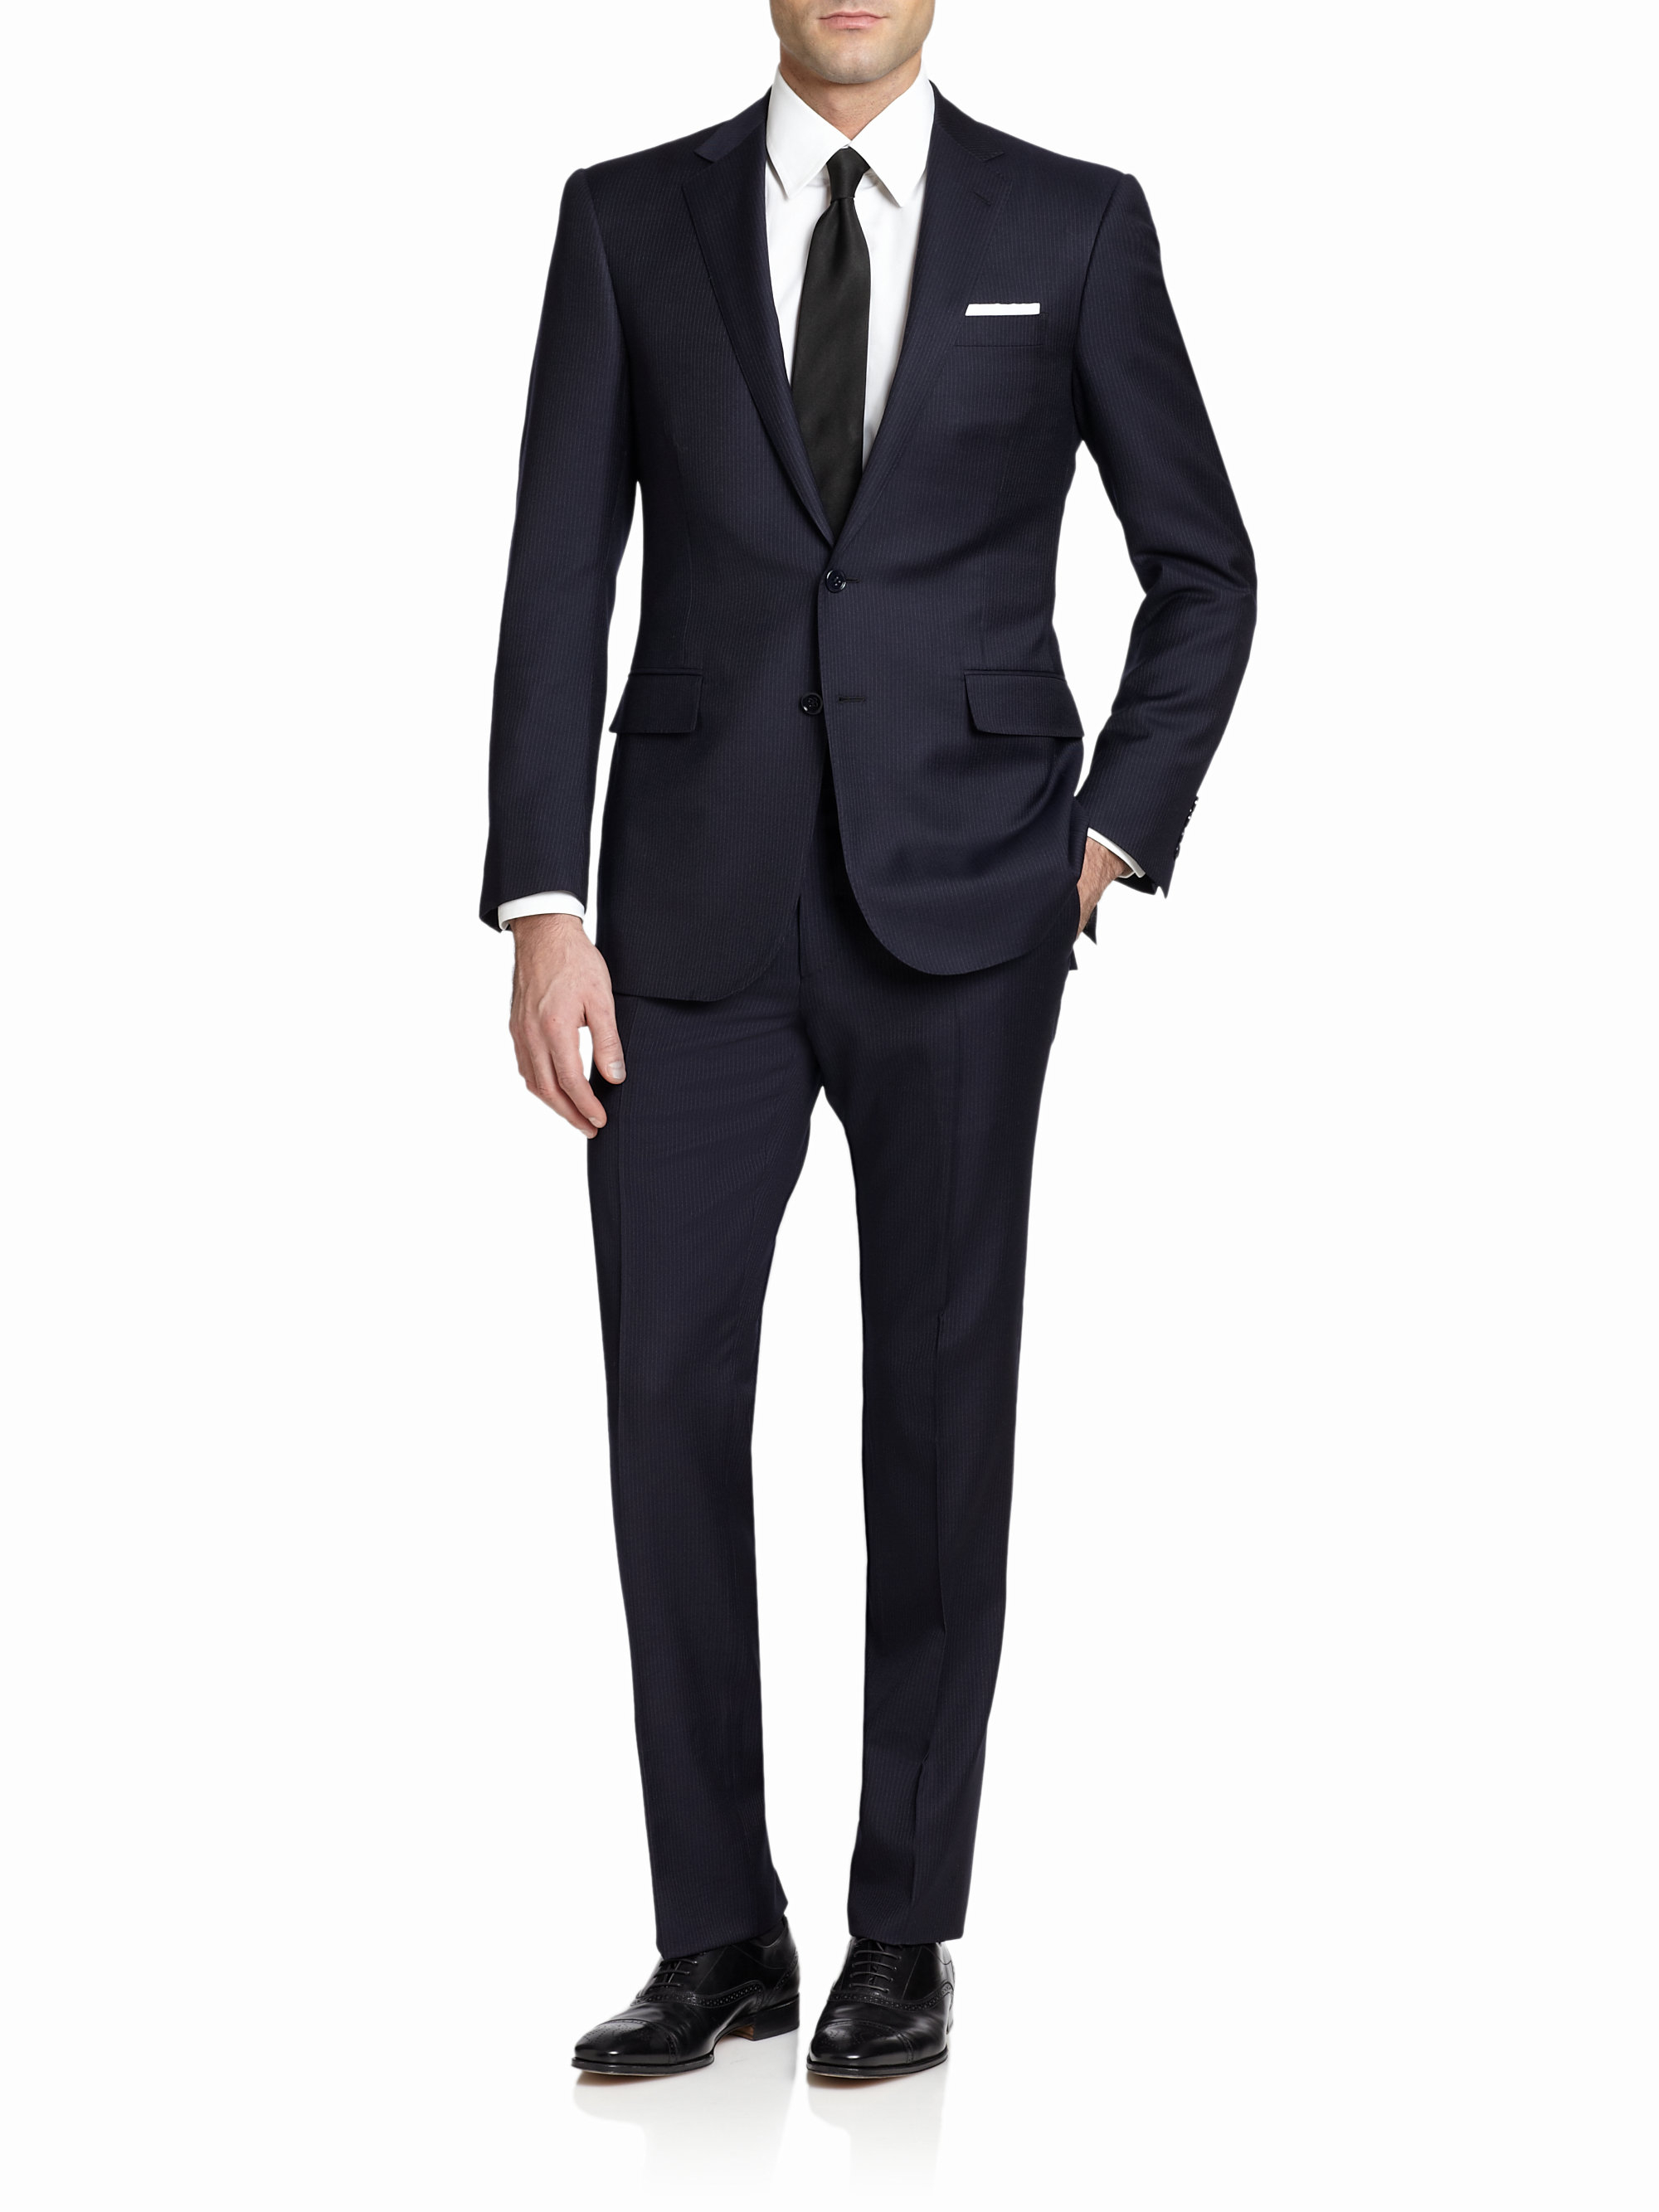 Lyst - Ralph lauren black label Anthony Pin Dot Striped Suit in Blue ...